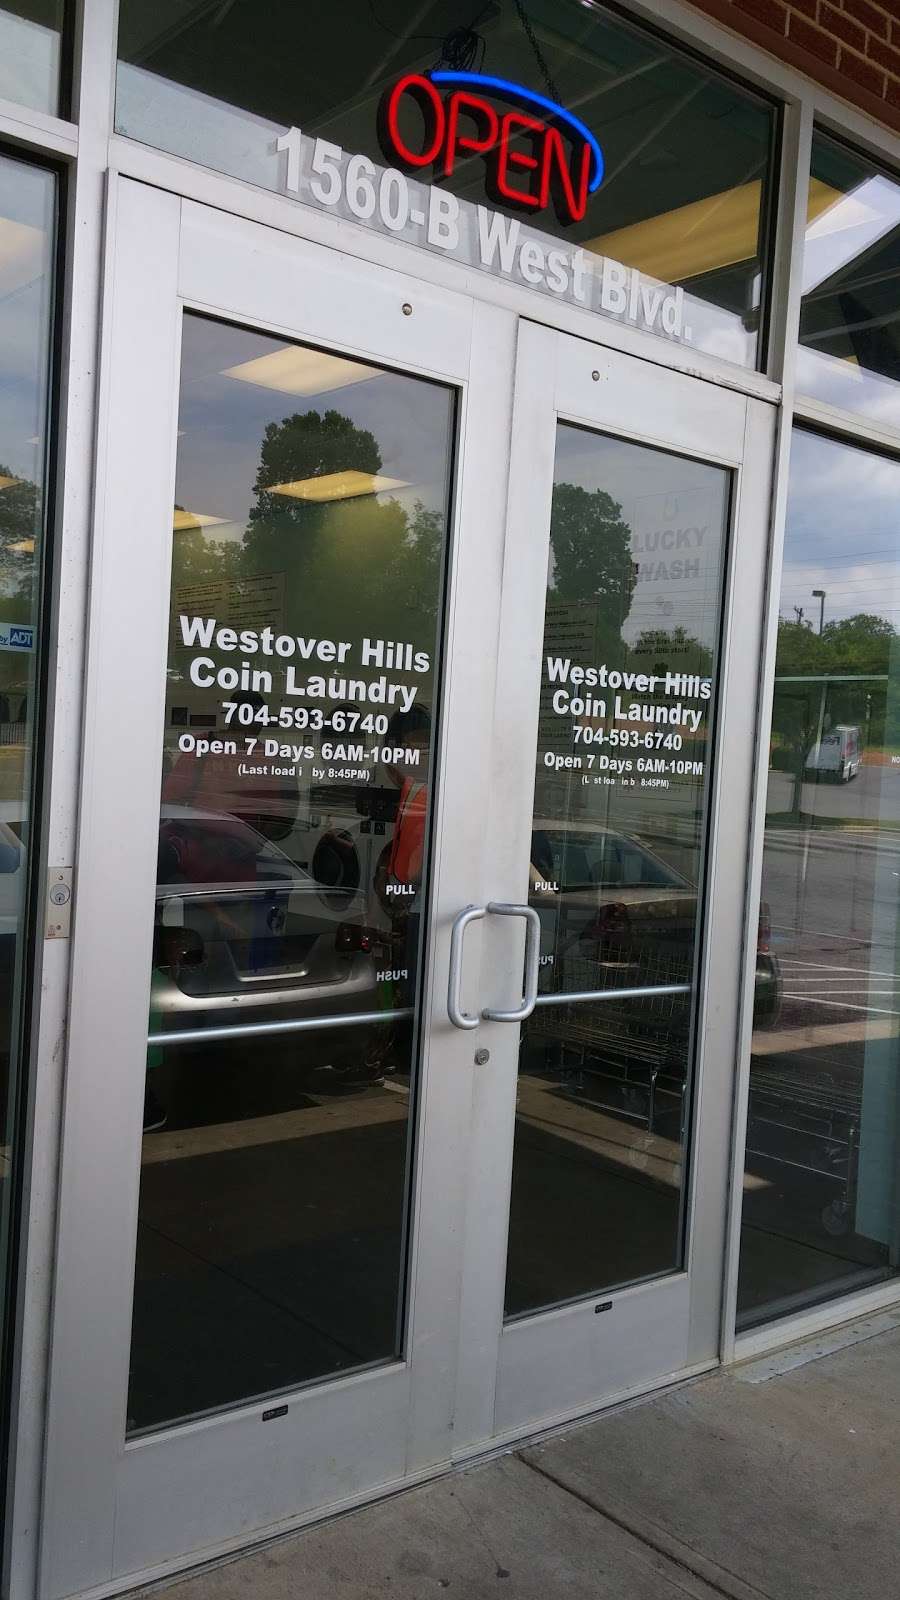 Westover Hills Coin Laundry | B, 1560 West Blvd, Charlotte, NC 28208, USA | Phone: (704) 593-6740